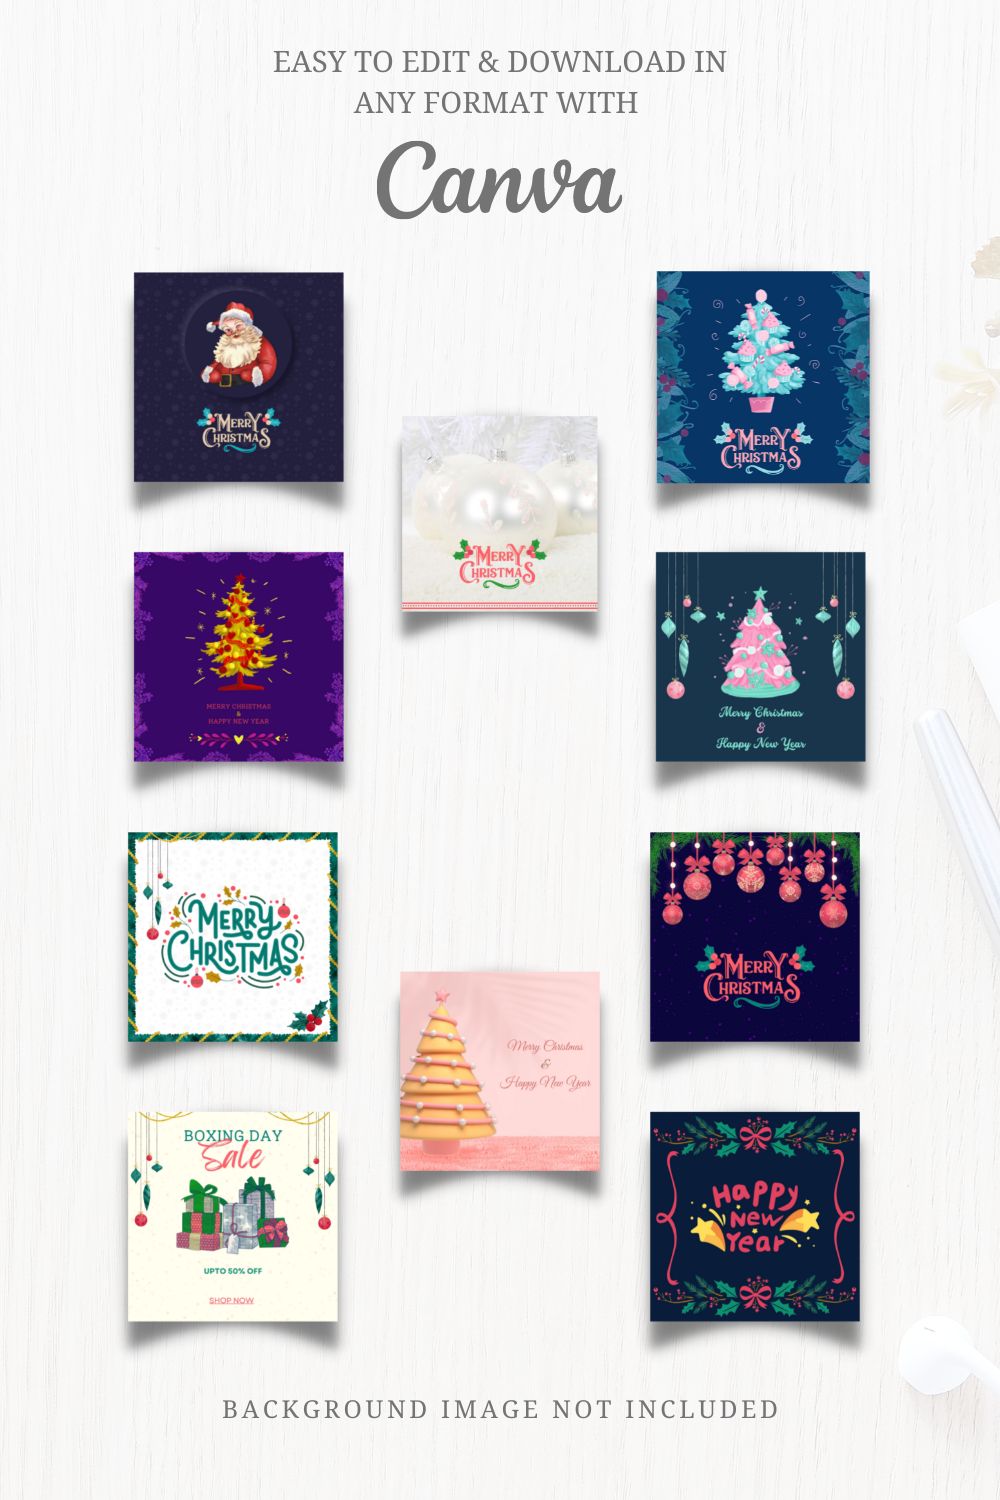 Christmas, New Year & Boxing Day Templates - pinterest image preview.